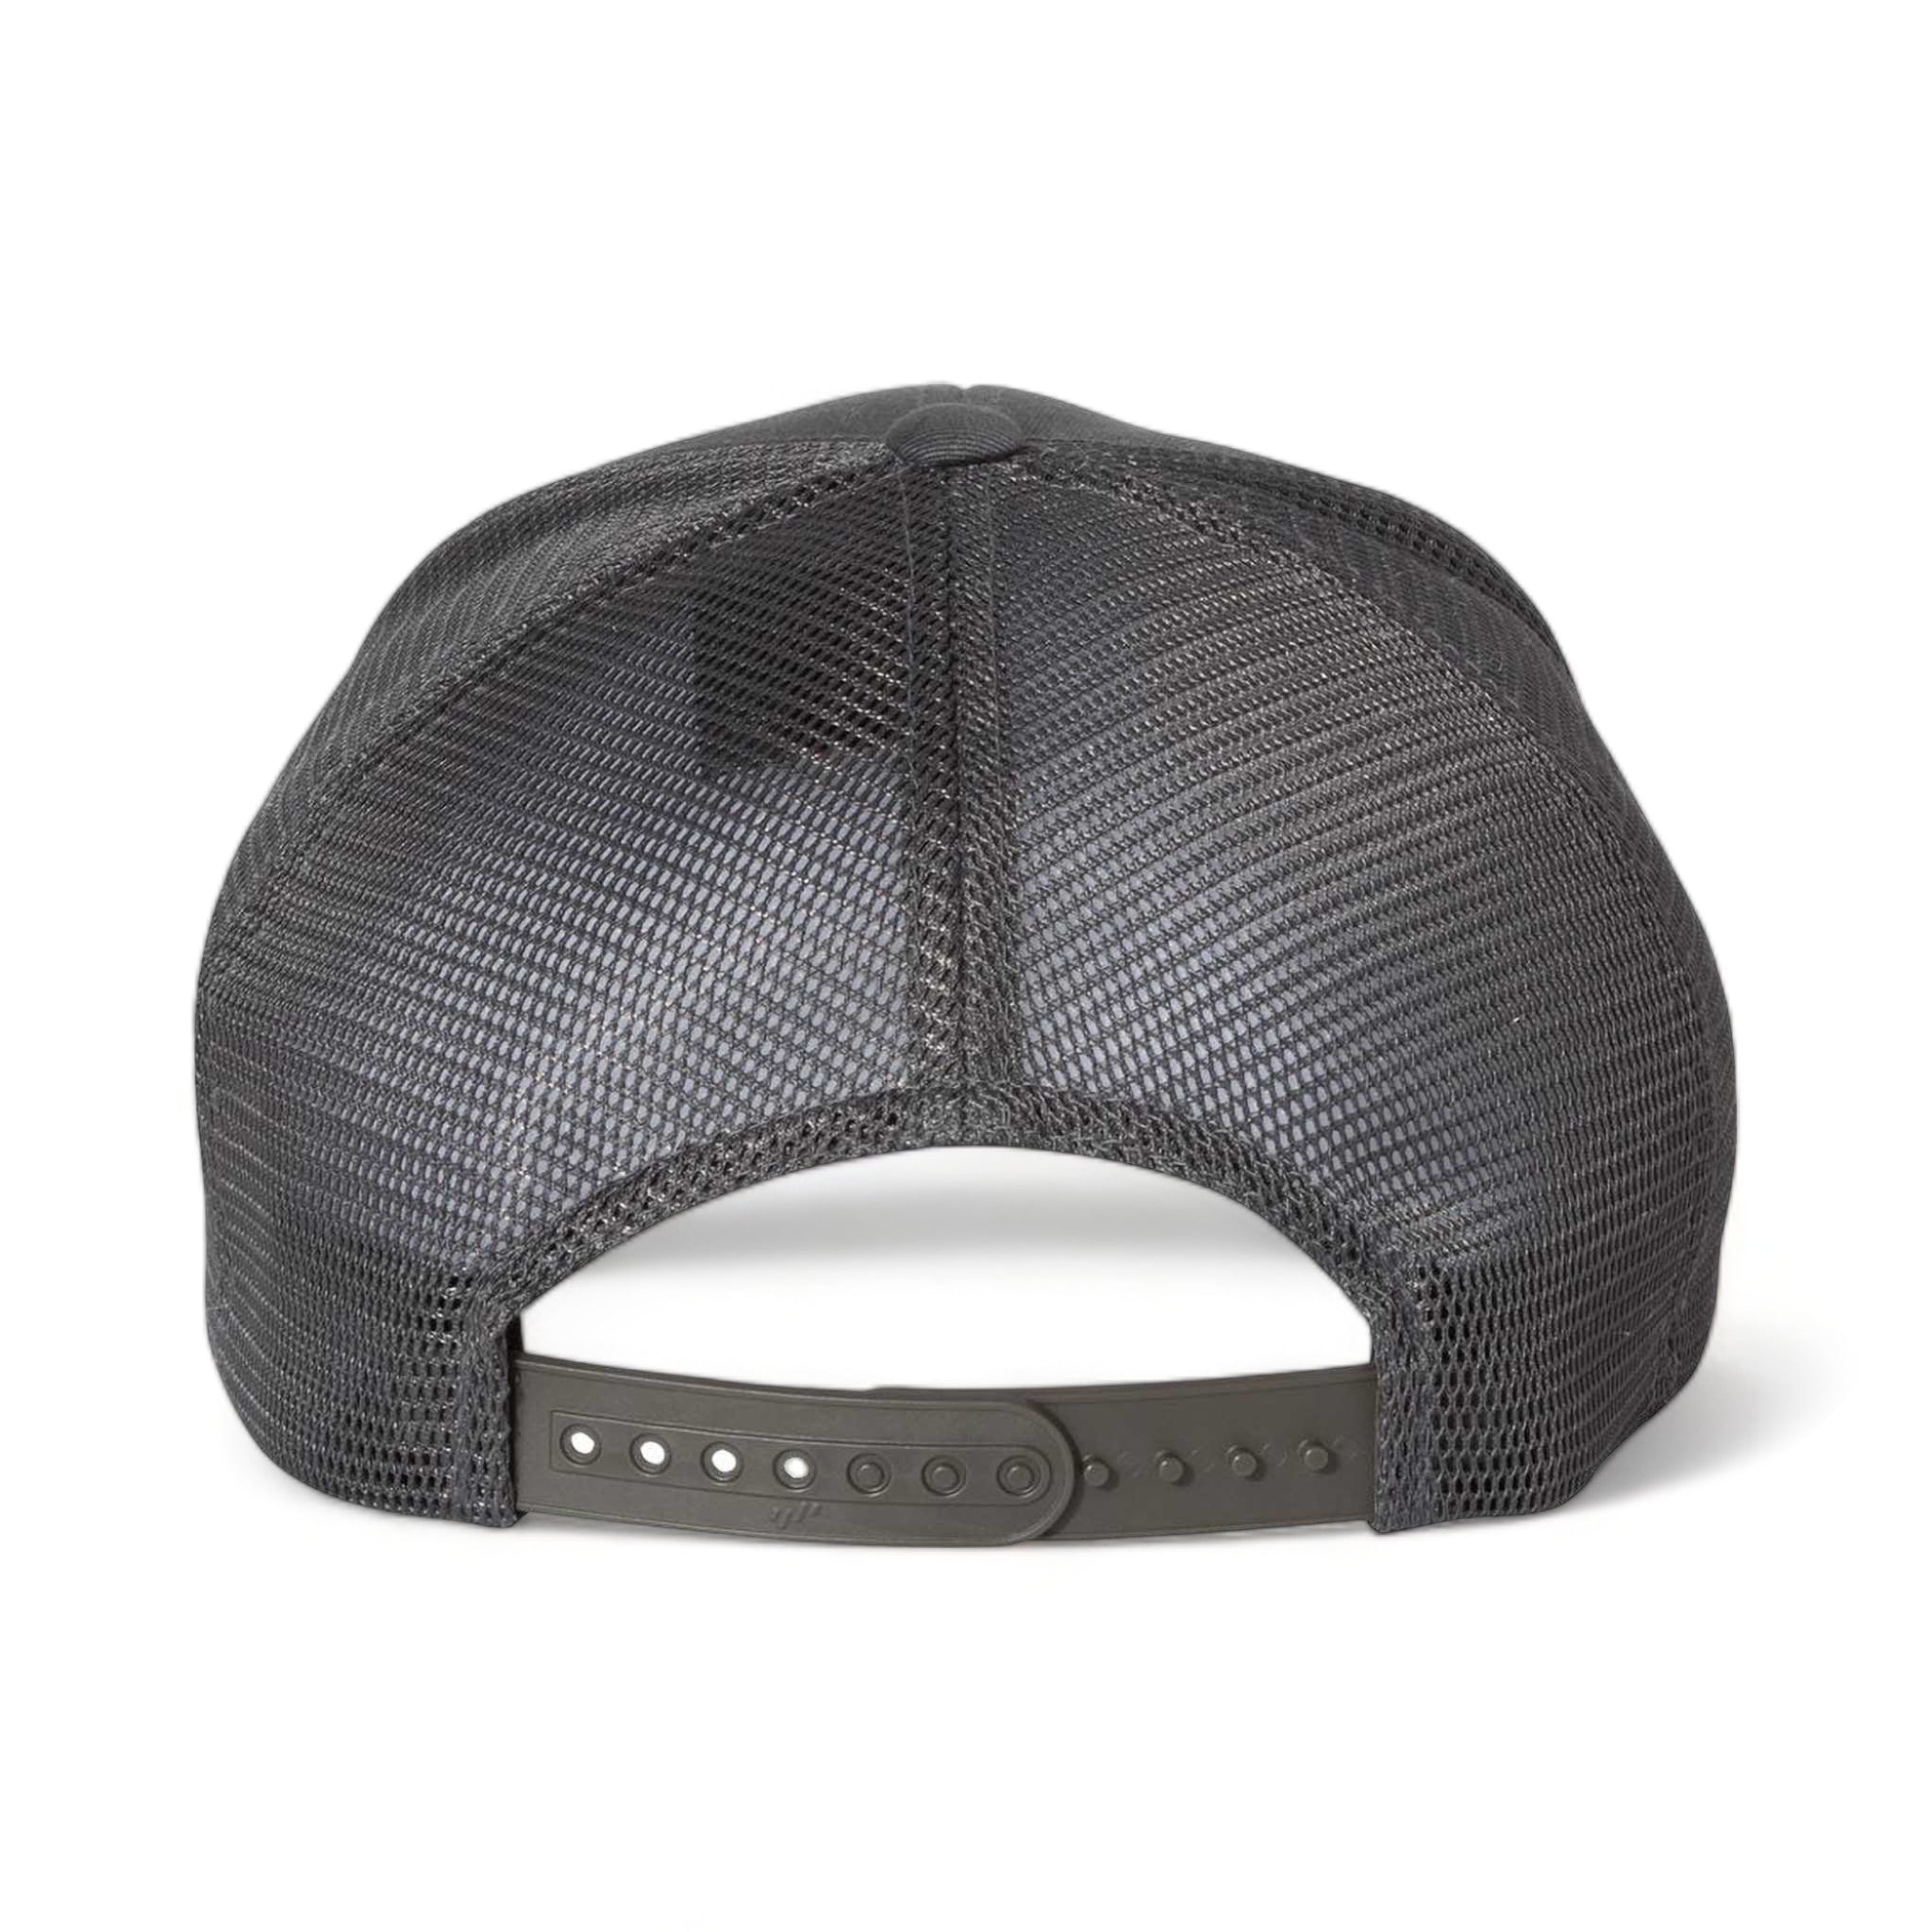 Back view of Flexfit 110M custom hat in charcoal